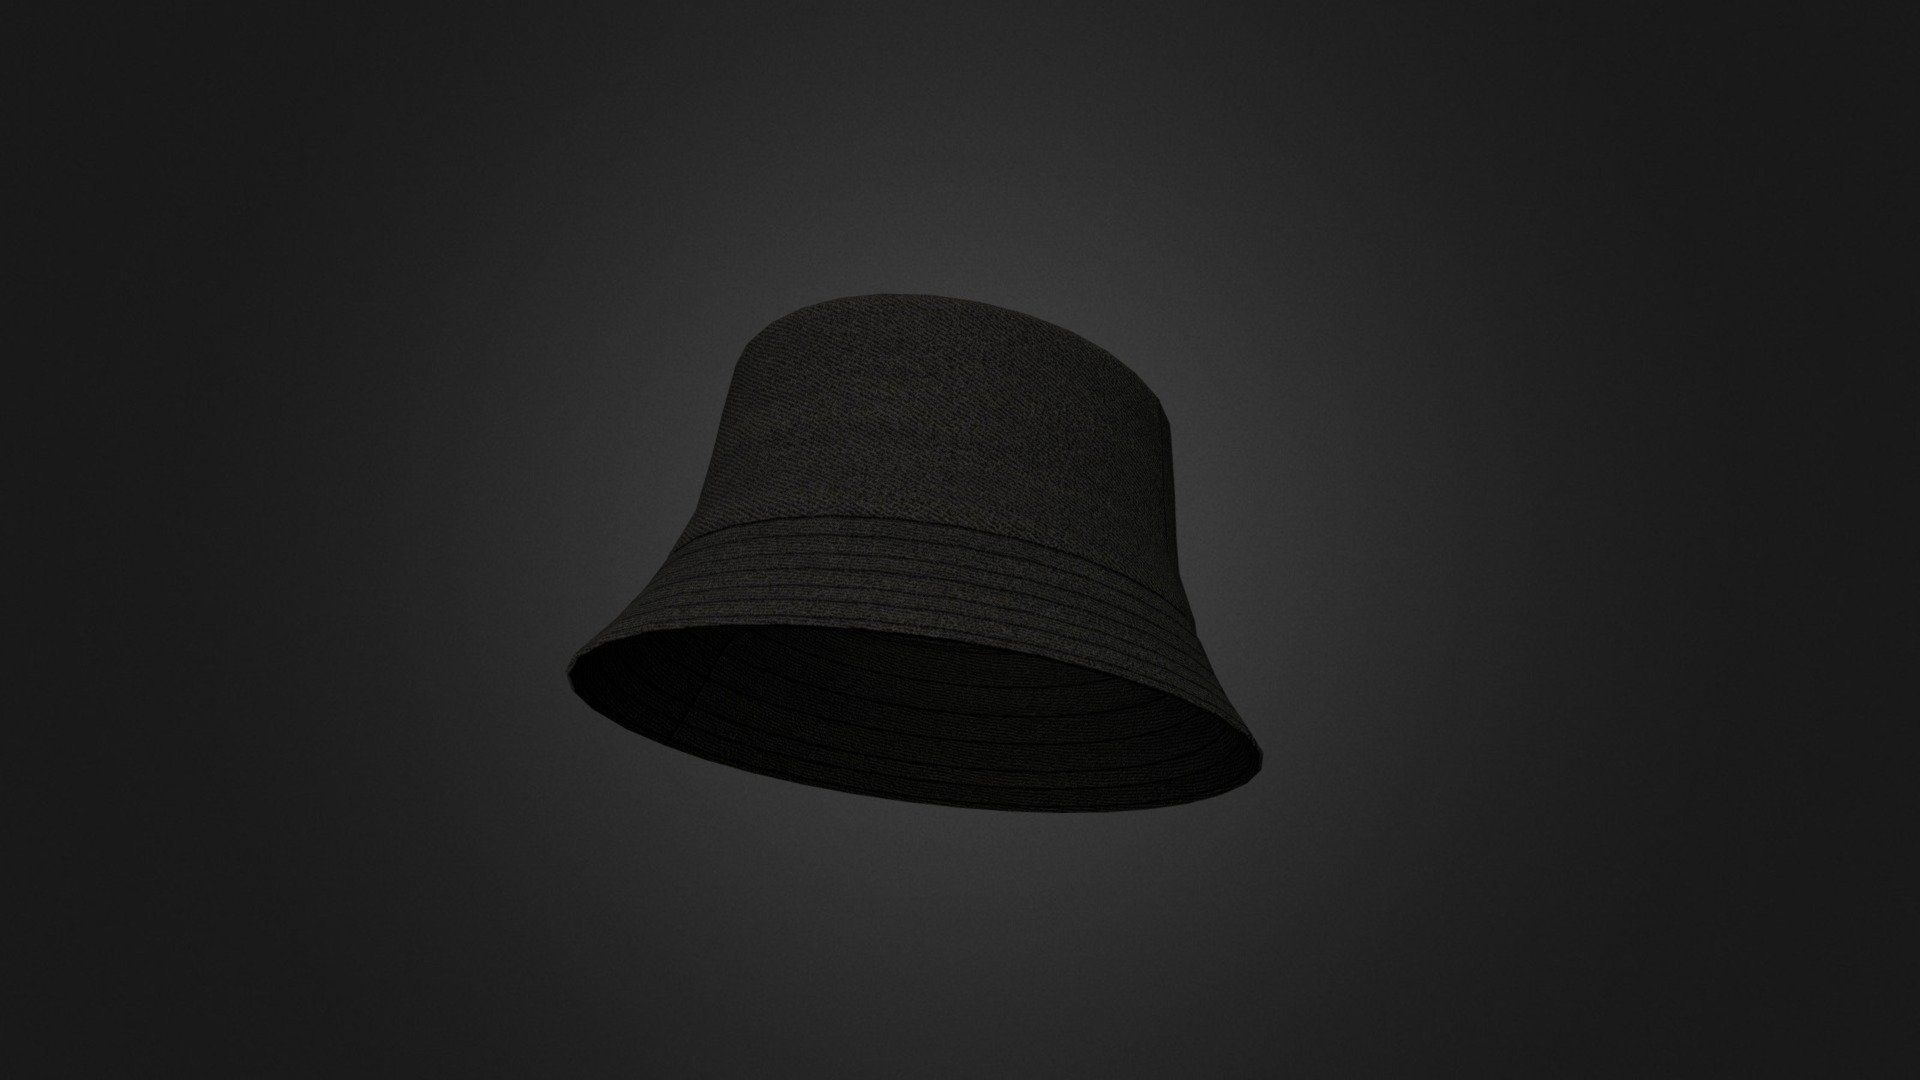 A simple bucket hat I've tried to keep optimised for use in a game engine. 2048x2048 textures are probably a bit overkill but they can always be downscaled if needed. Includes morph targets to make it look more inperfect but I couldn't figure out how to include export them for sketchfab 3d model